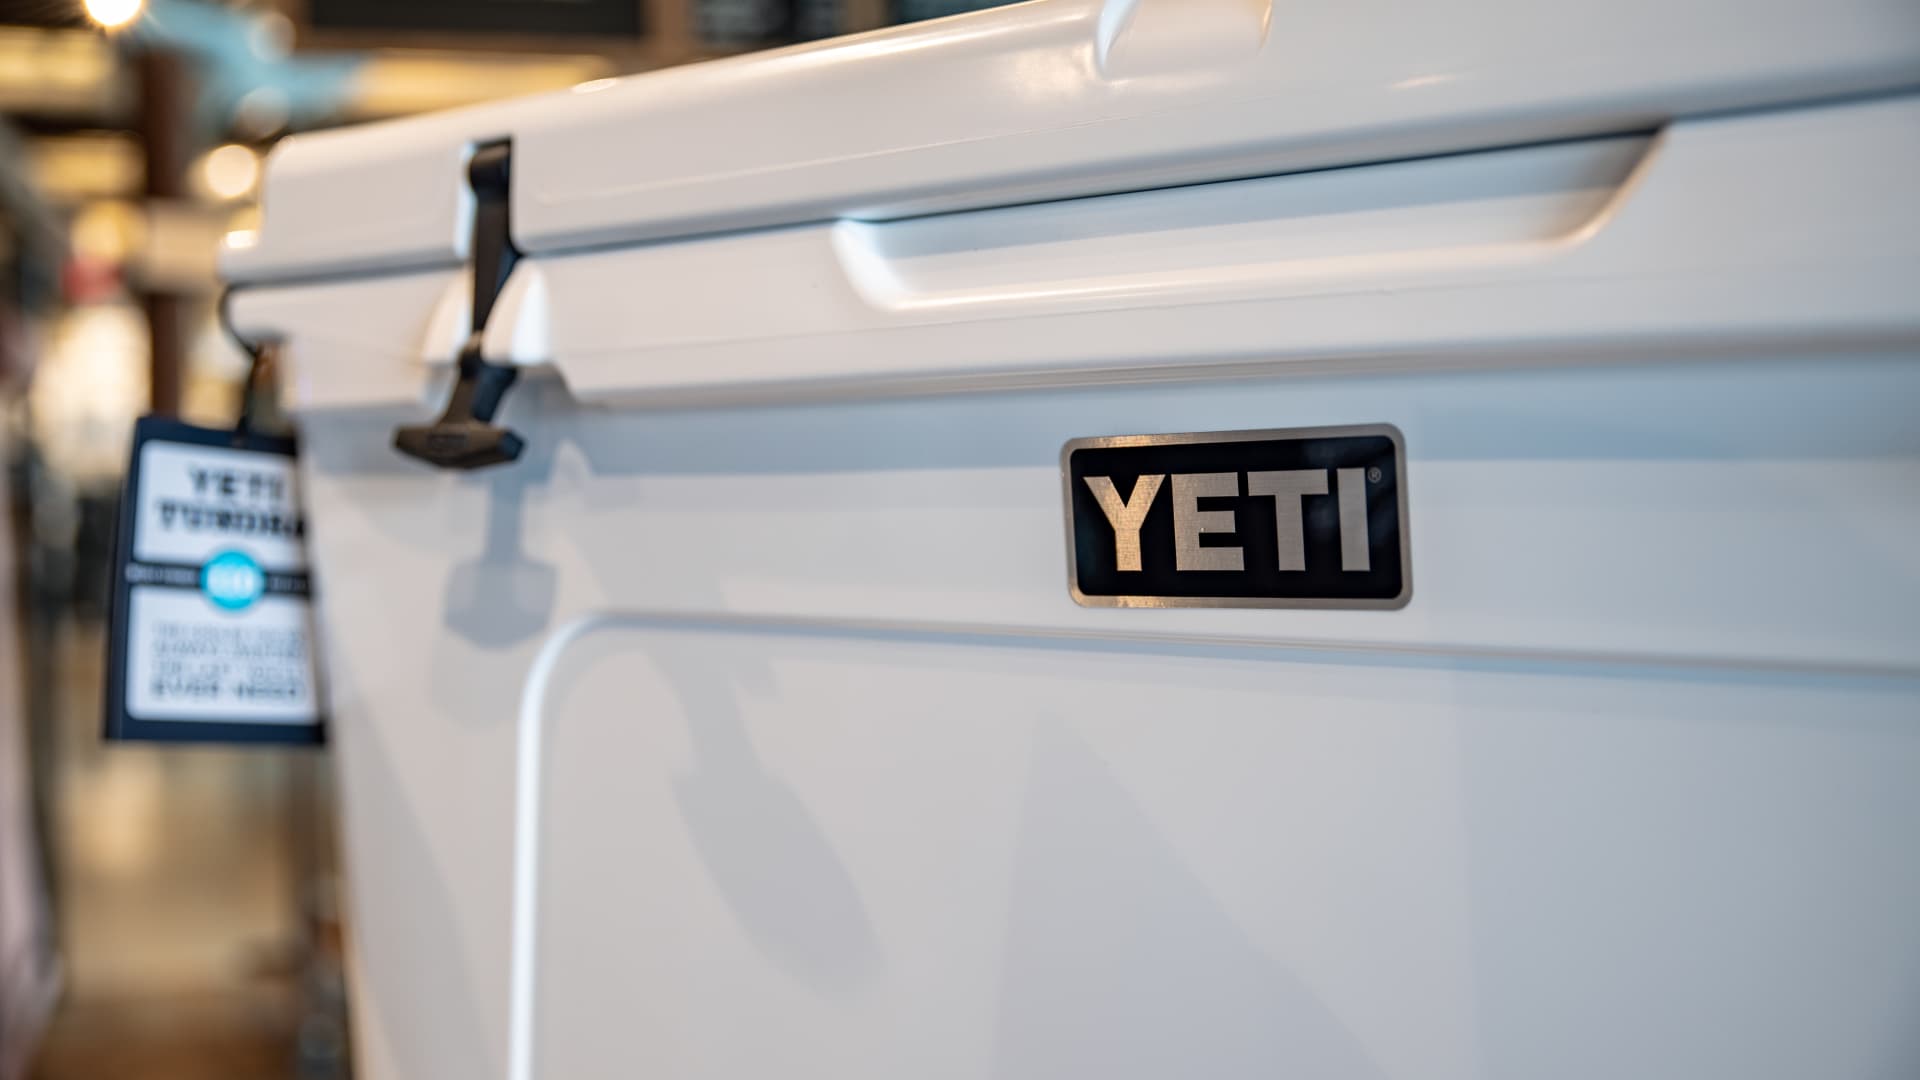 Yeti is an investable stock for these three reasons, Jim Cramer says